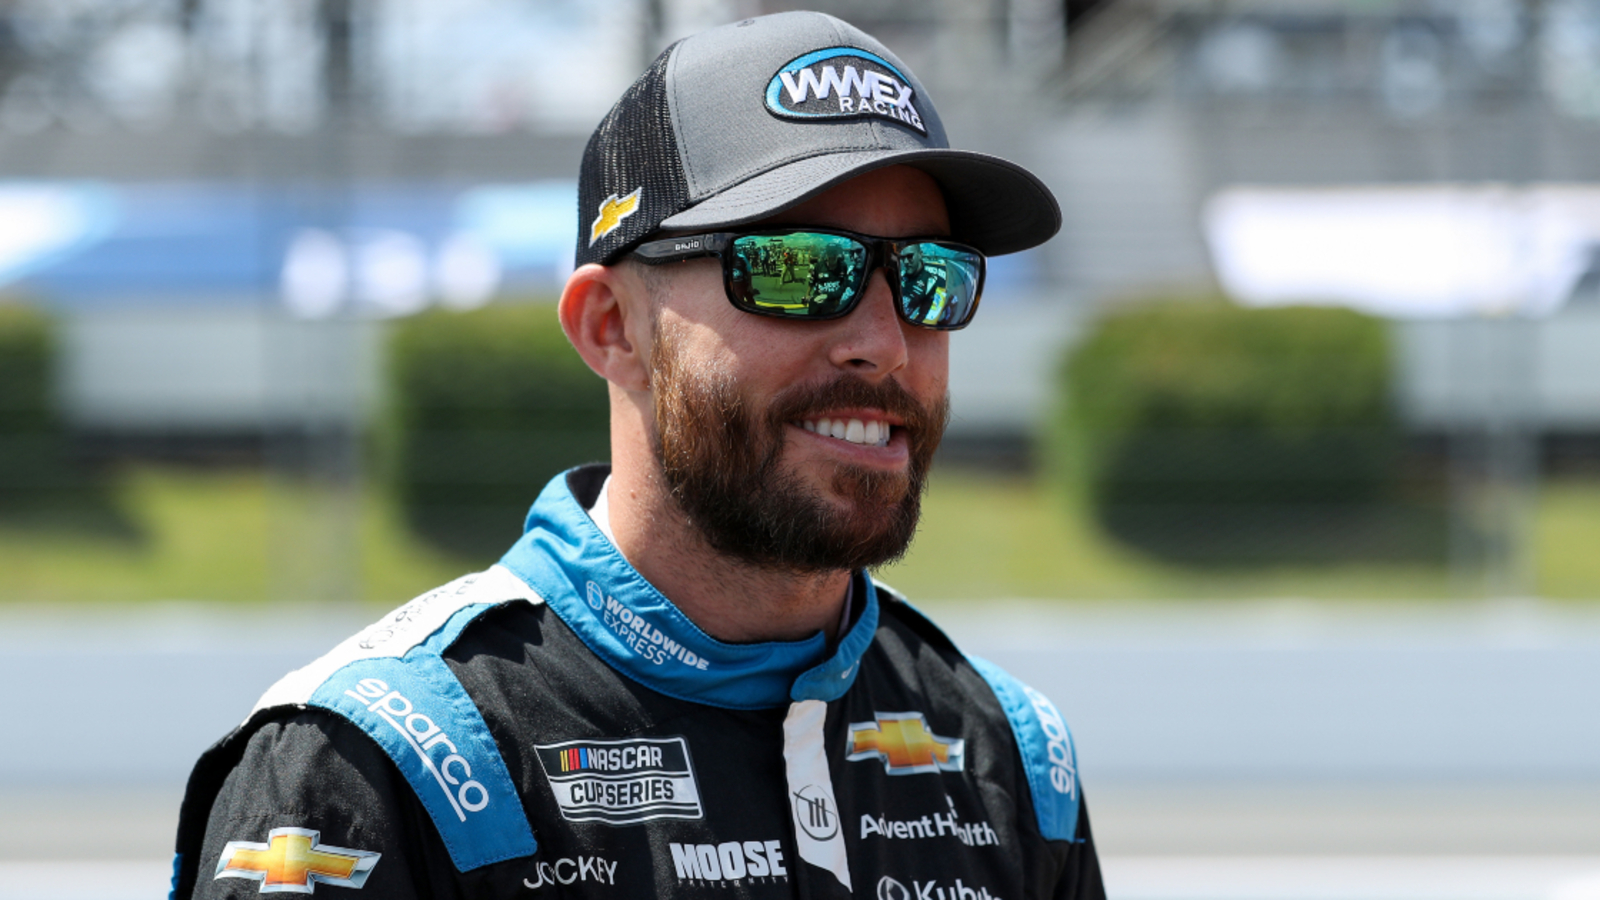 Ross Chastain to return to Truck Series for Niece Motorsports at Darlington